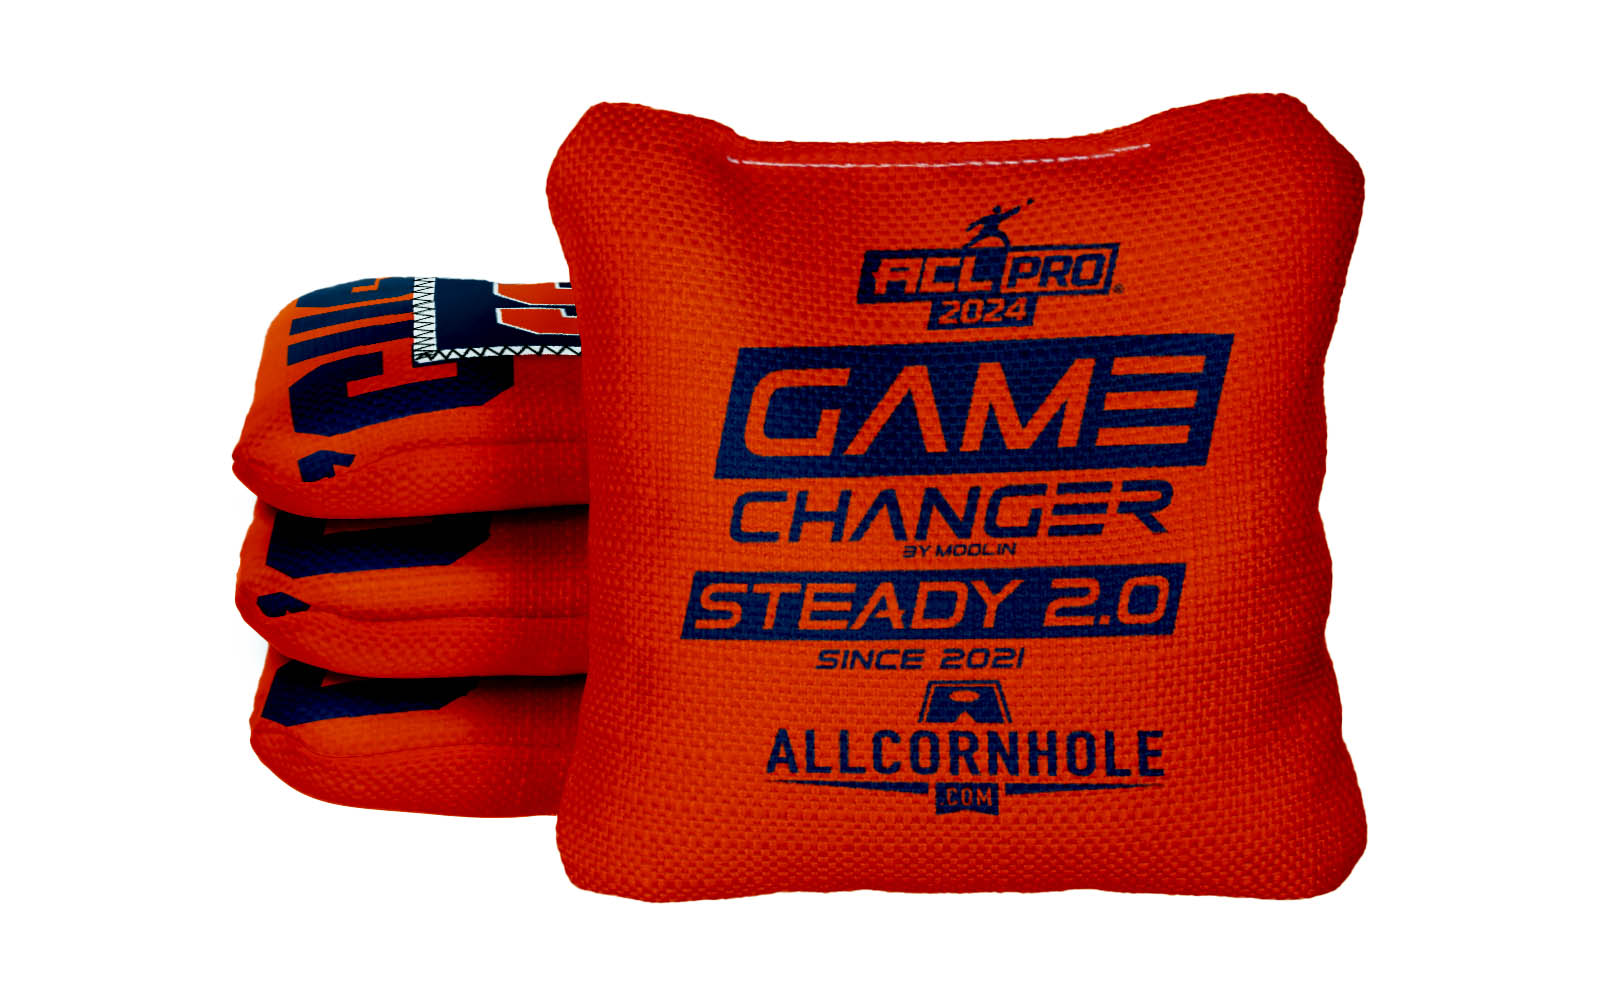 Officially Licensed Collegiate Cornhole Bags - AllCornhole Game Changers Steady 2.0 - Set of 4 - Syracuse University